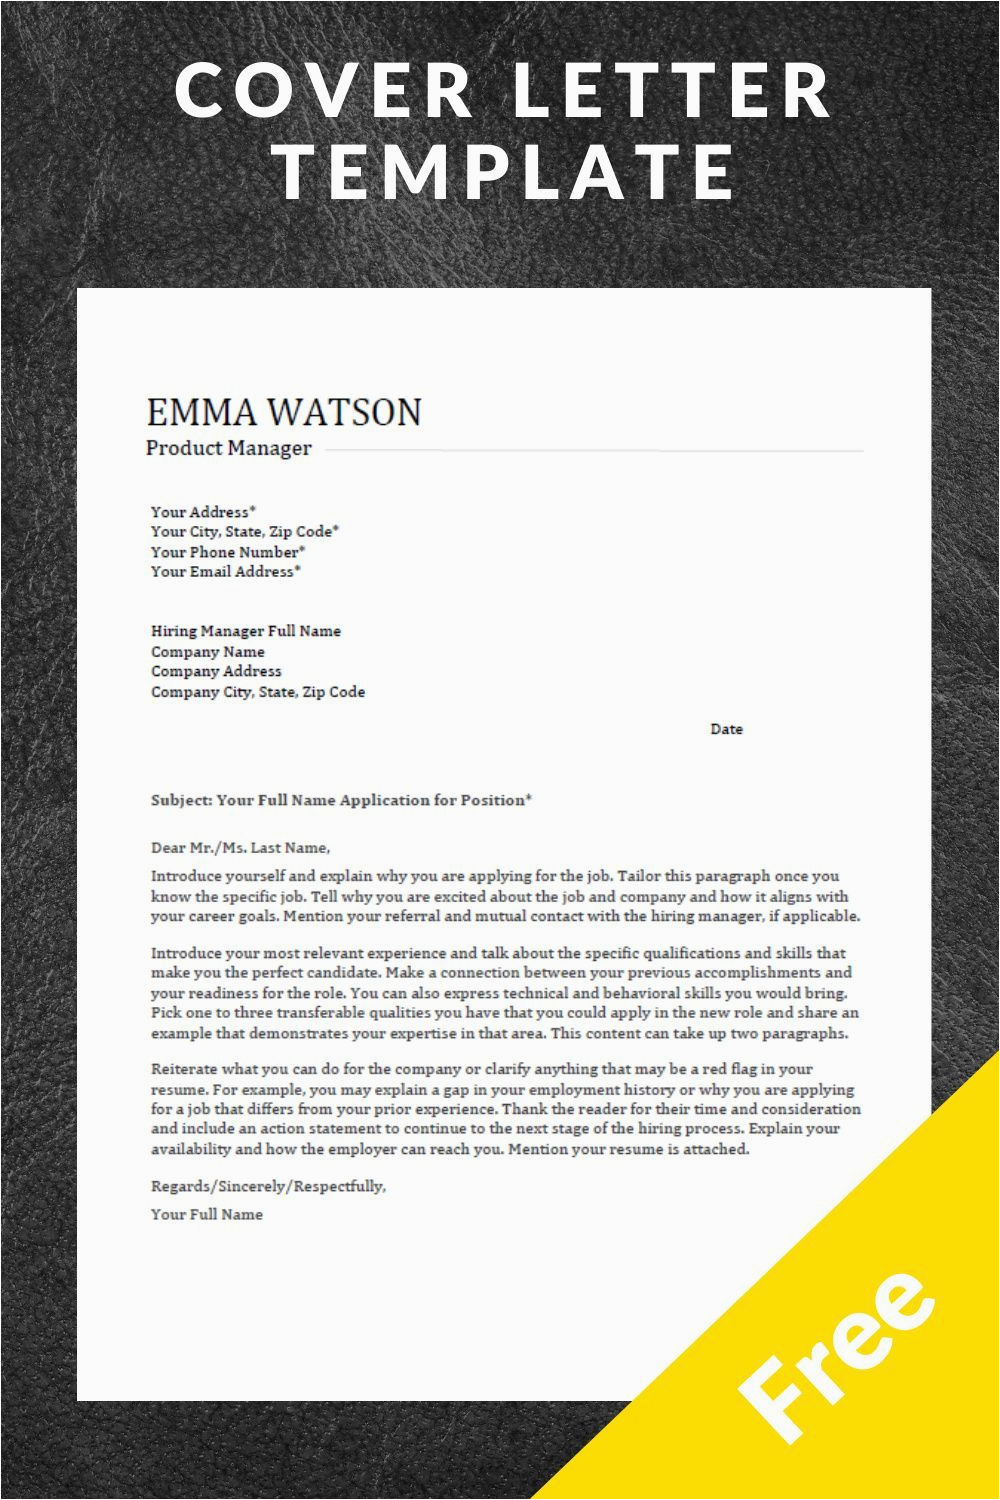 Free Online Resume and Cover Letter Templates Cover Letter Template Download for Free